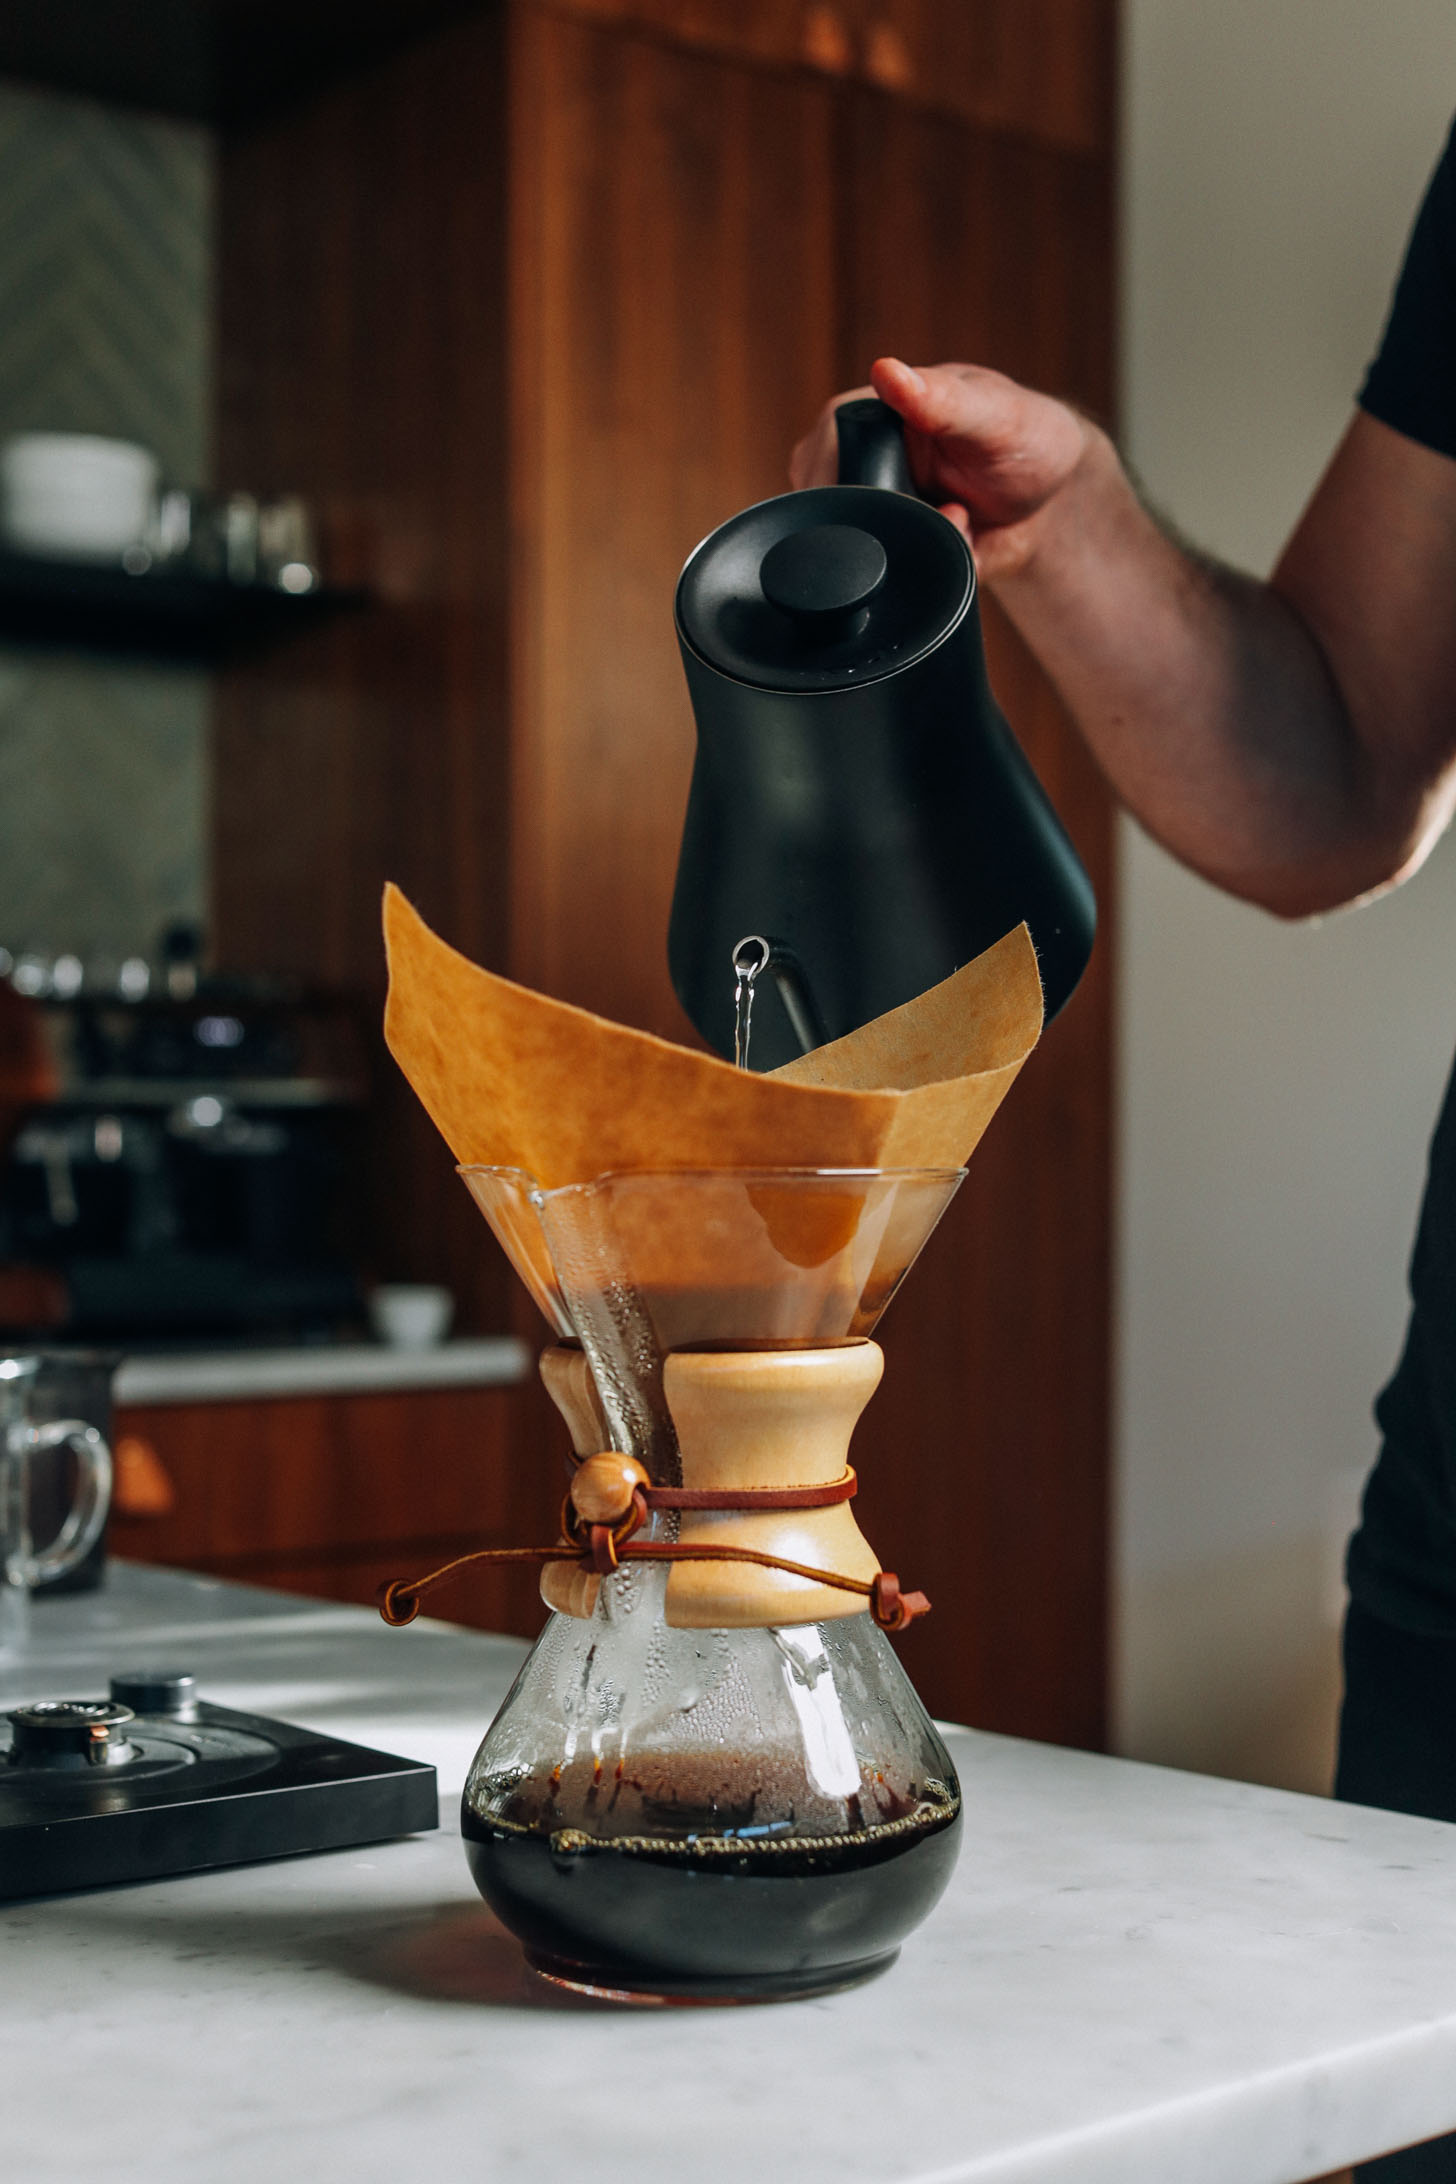 Pouring hot water through a coffee filter into a drip coffee maker